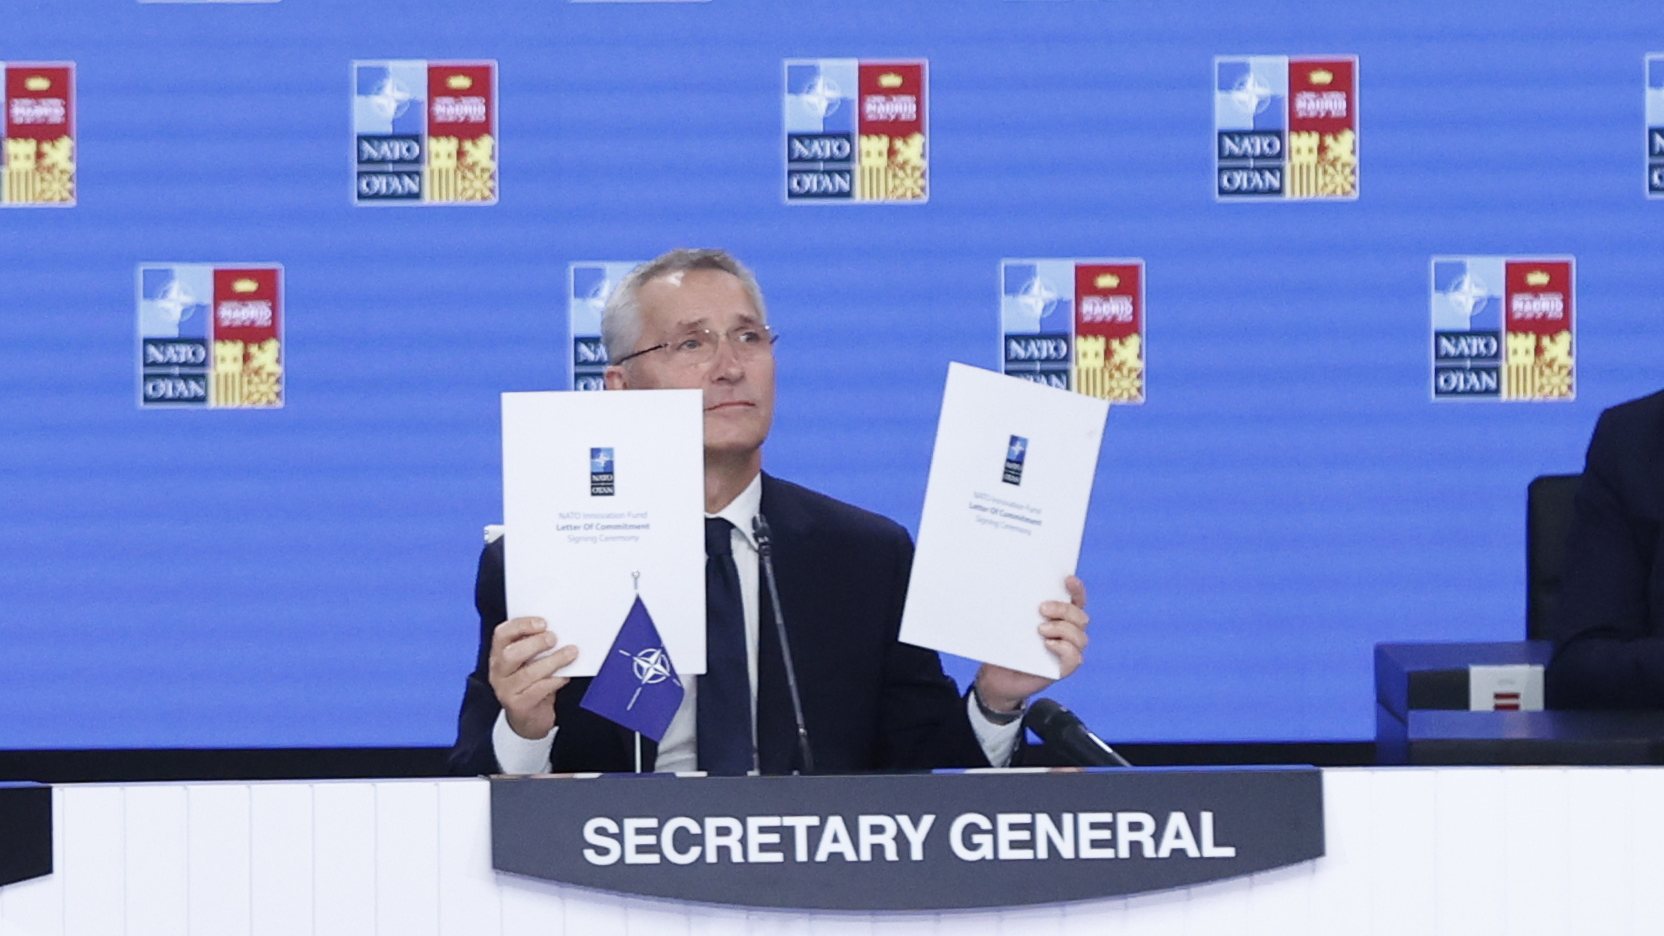 epa10042963 NATO&#039;s Secretary General, Jens Stoltenberg (C), holds the documents of the NATO Innovation Fund Letter of Commitment during the signing ceremony held in the framework of second and last day of NATO Summit at IFEMA Convention Center, in Madrid, Spain, 30 June 2022. Some 40 world leaders attend the summit, running from 29 to 30 June, focused on the ongoing Russian invasion of Ukraine. Spain hosts the event to mark the 40th anniversary of its accession to NATO.  EPA/BRAIS LORENZO